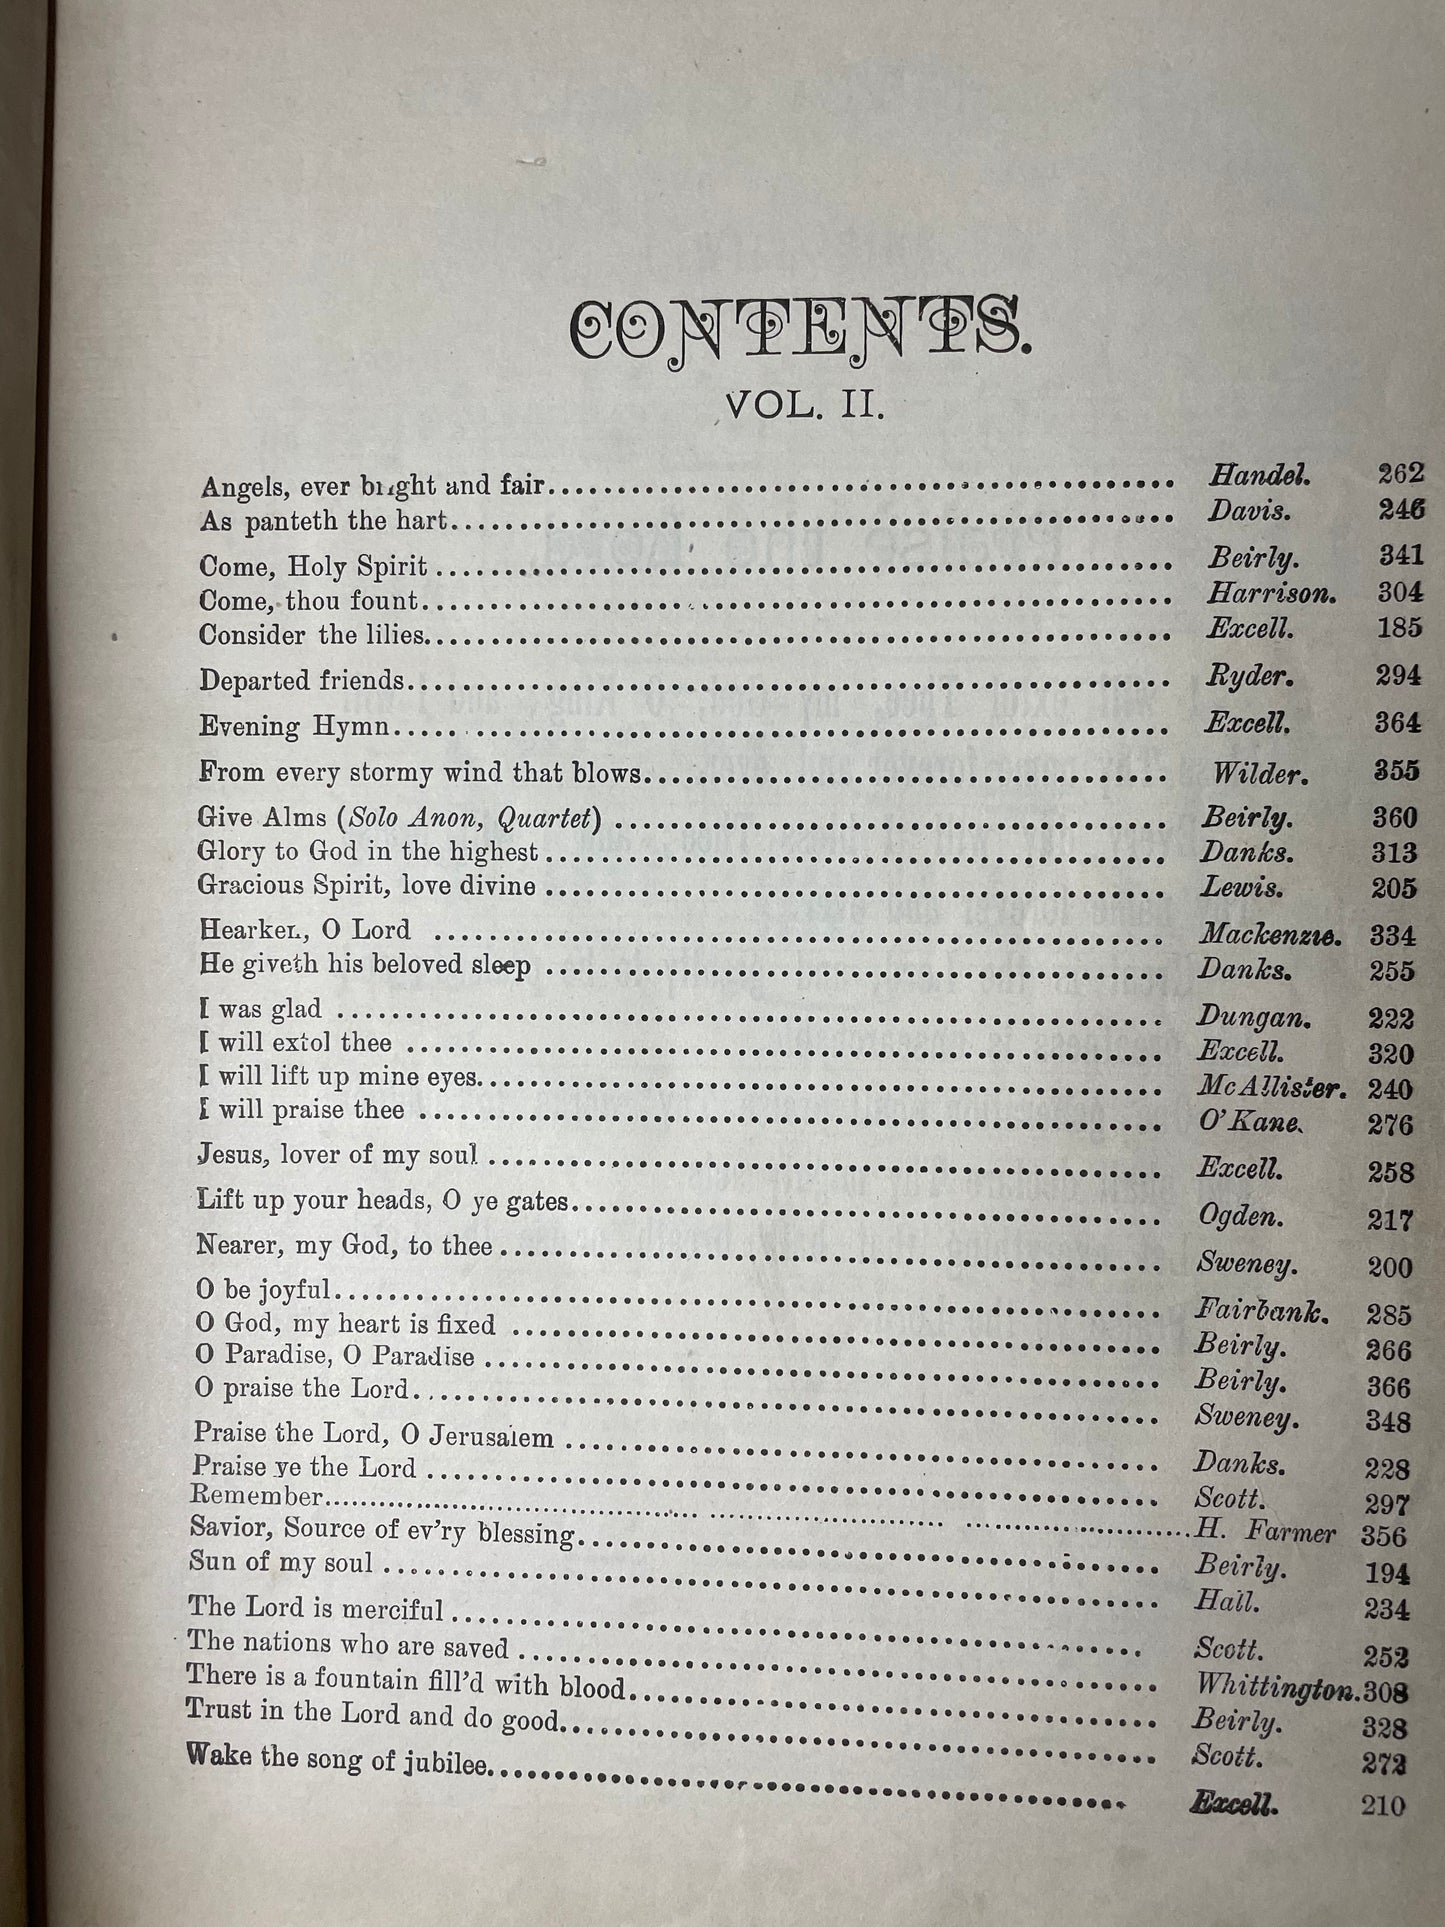 Excell’s Anthems for the Choir 1888